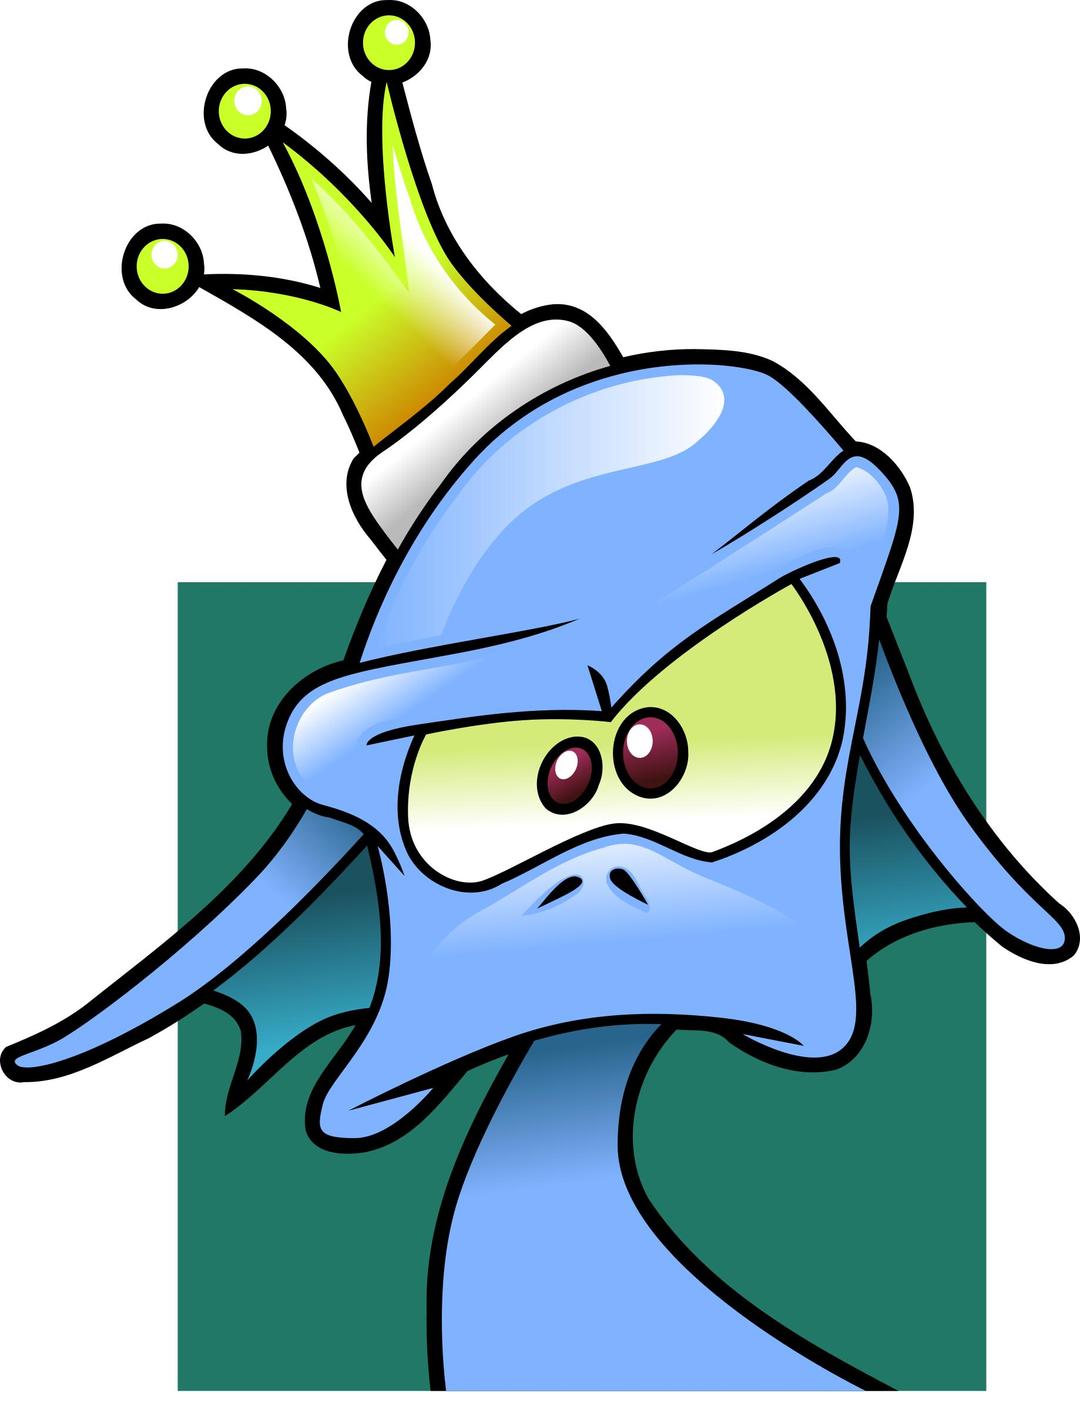 King of fish avatar png transparent